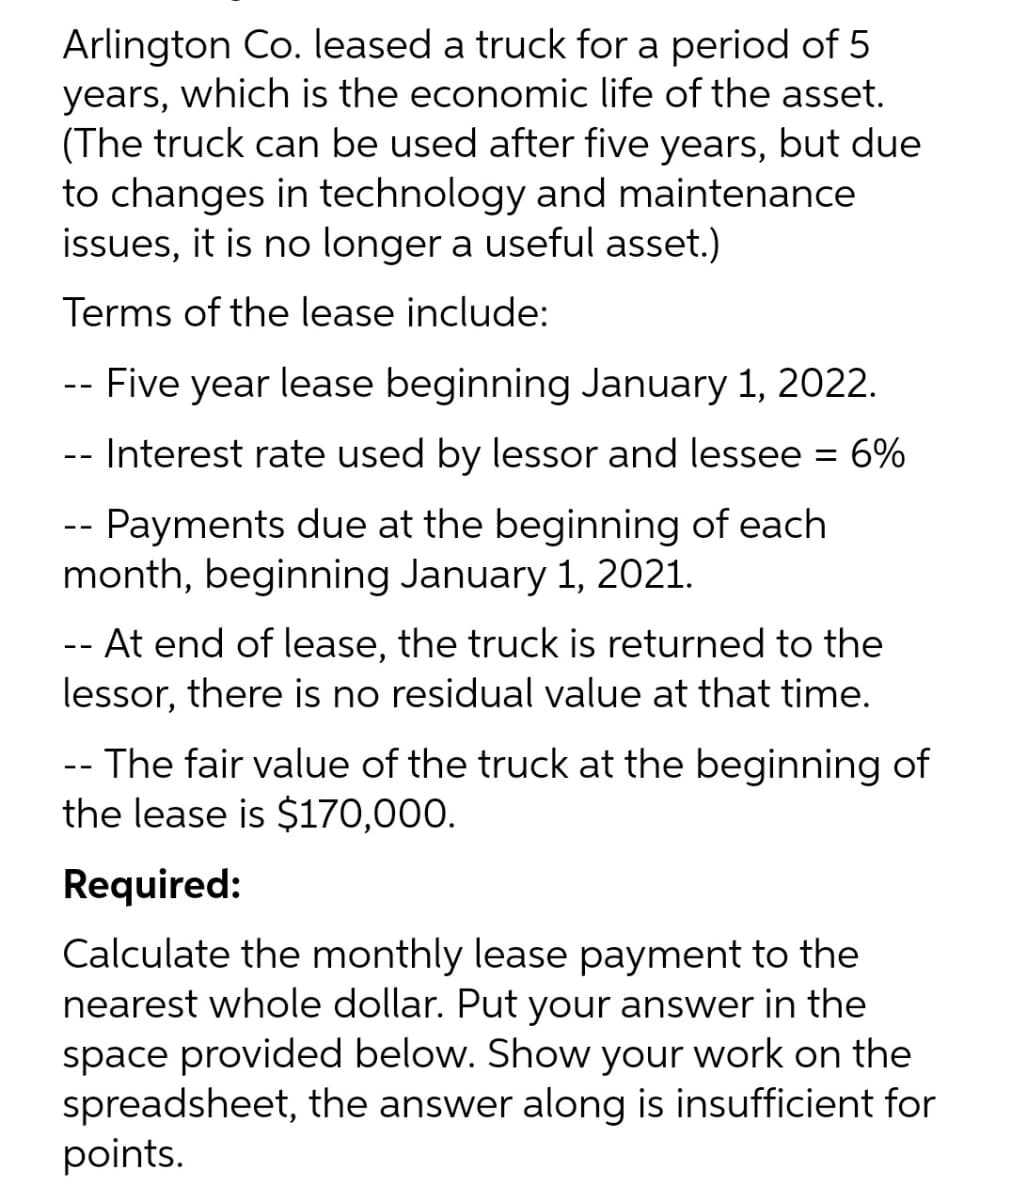 Arlington Co. leased a truck for a period of 5
years, which is the economic life of the asset.
(The truck can be used after five years, but due
to changes in technology and maintenance
issues, it is no longer a useful asset.)
Terms of the lease include:
--
- Five year lease beginning January 1, 2022.
-- Interest rate used by lessor and lessee = 6%
-- Payments due at the beginning of each
month, beginning January 1, 2021.
-- At end of lease, the truck is returned to the
lessor, there is no residual value at that time.
-- The fair value of the truck at the beginning of
the lease is $170,000.
Required:
Calculate the monthly lease payment to the
nearest whole dollar. Put your answer in the
space provided below. Show your work on the
spreadsheet, the answer along is insufficient for
points.